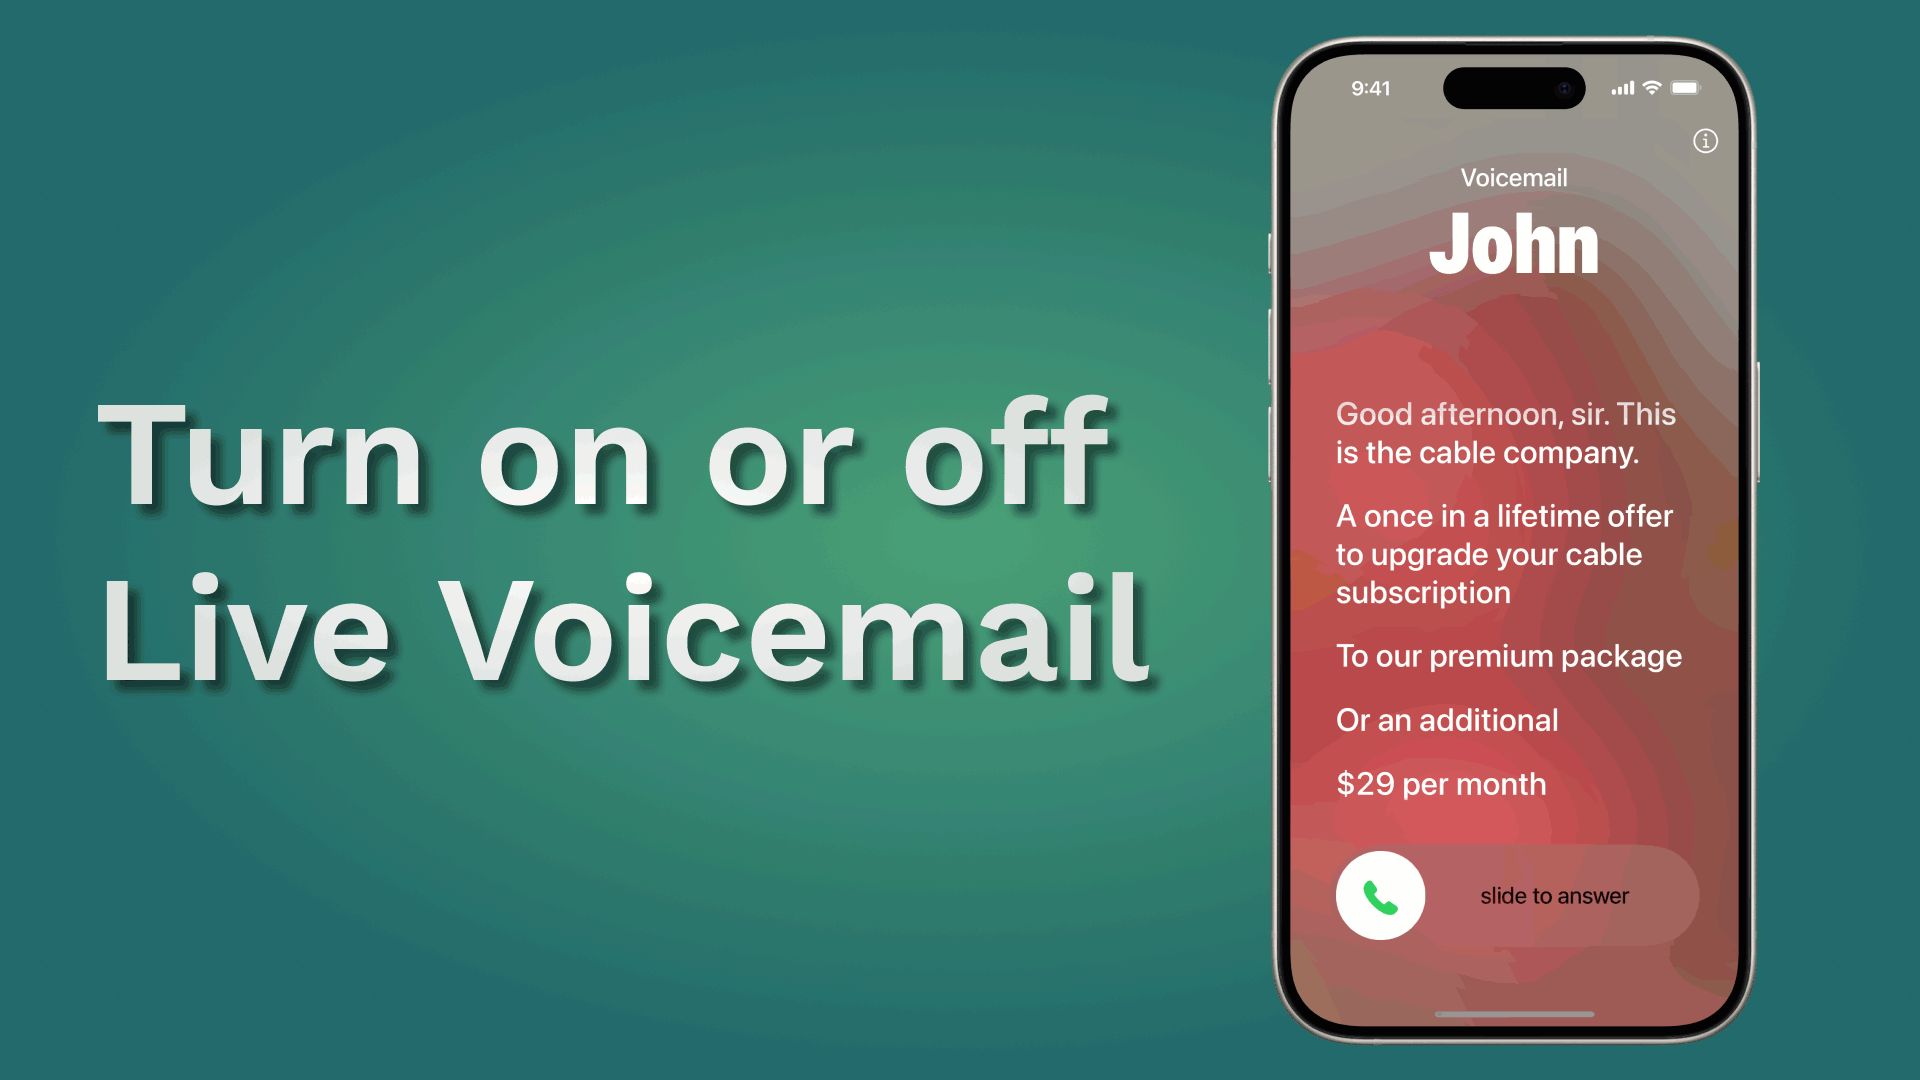 iPhone frame showing a step-by-step process to enable live voicemail in the settings app